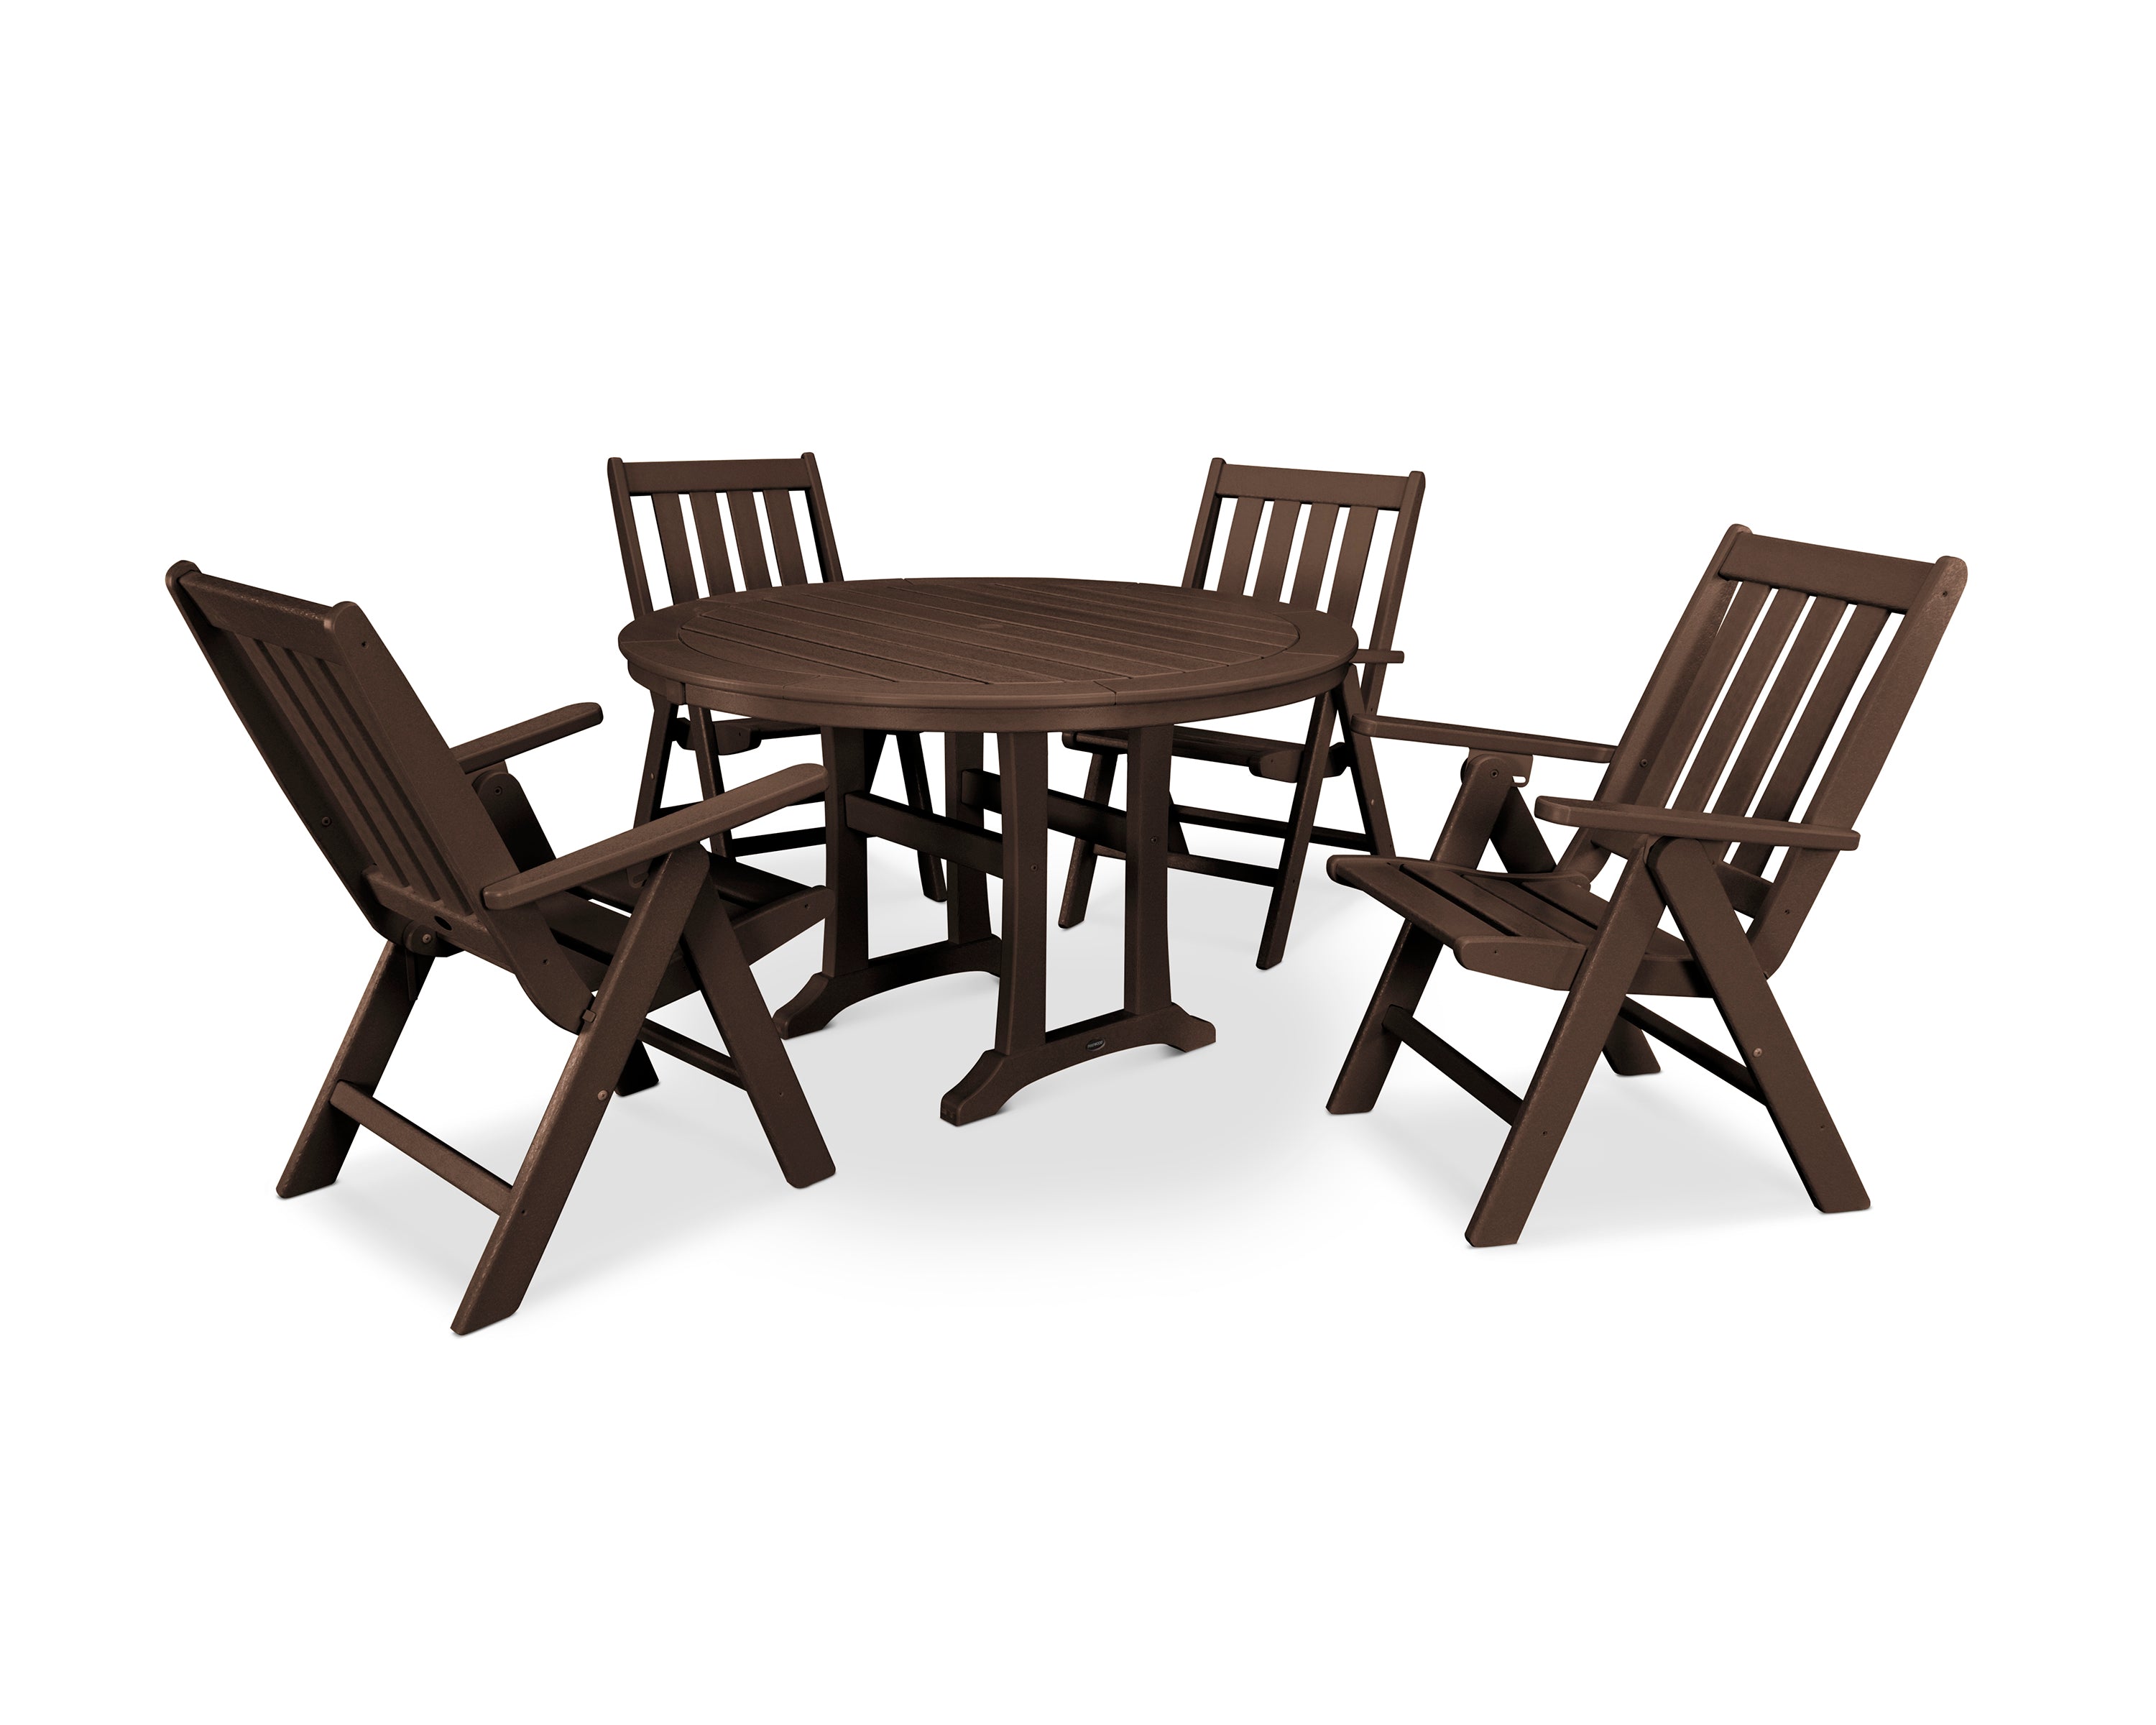 POLYWOOD® Vineyard Folding Chair 5-Piece Round Dining Set with Trestle Legs in Mahogany